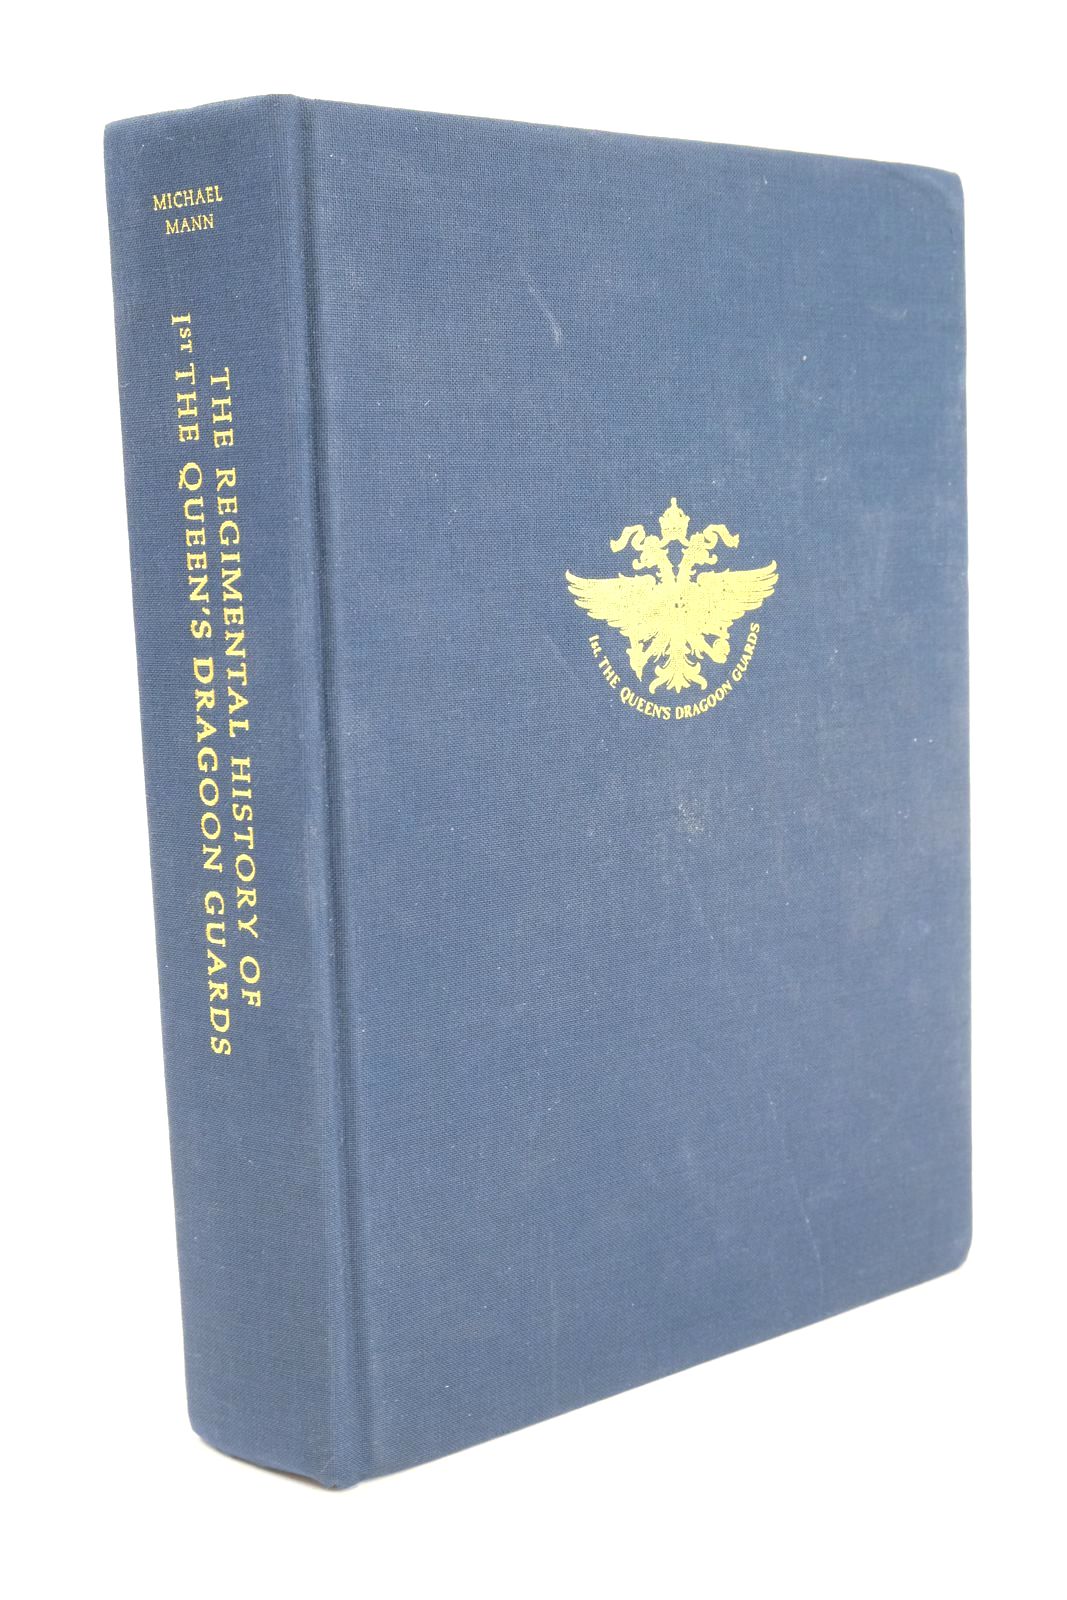 Photo of THE REGIMENTAL HISTORY OF 1ST THE QUEEN'S DRAGOON GUARDS written by Mann, Michael published by 1st The Queen's Dragoon Guards (STOCK CODE: 1324932)  for sale by Stella & Rose's Books